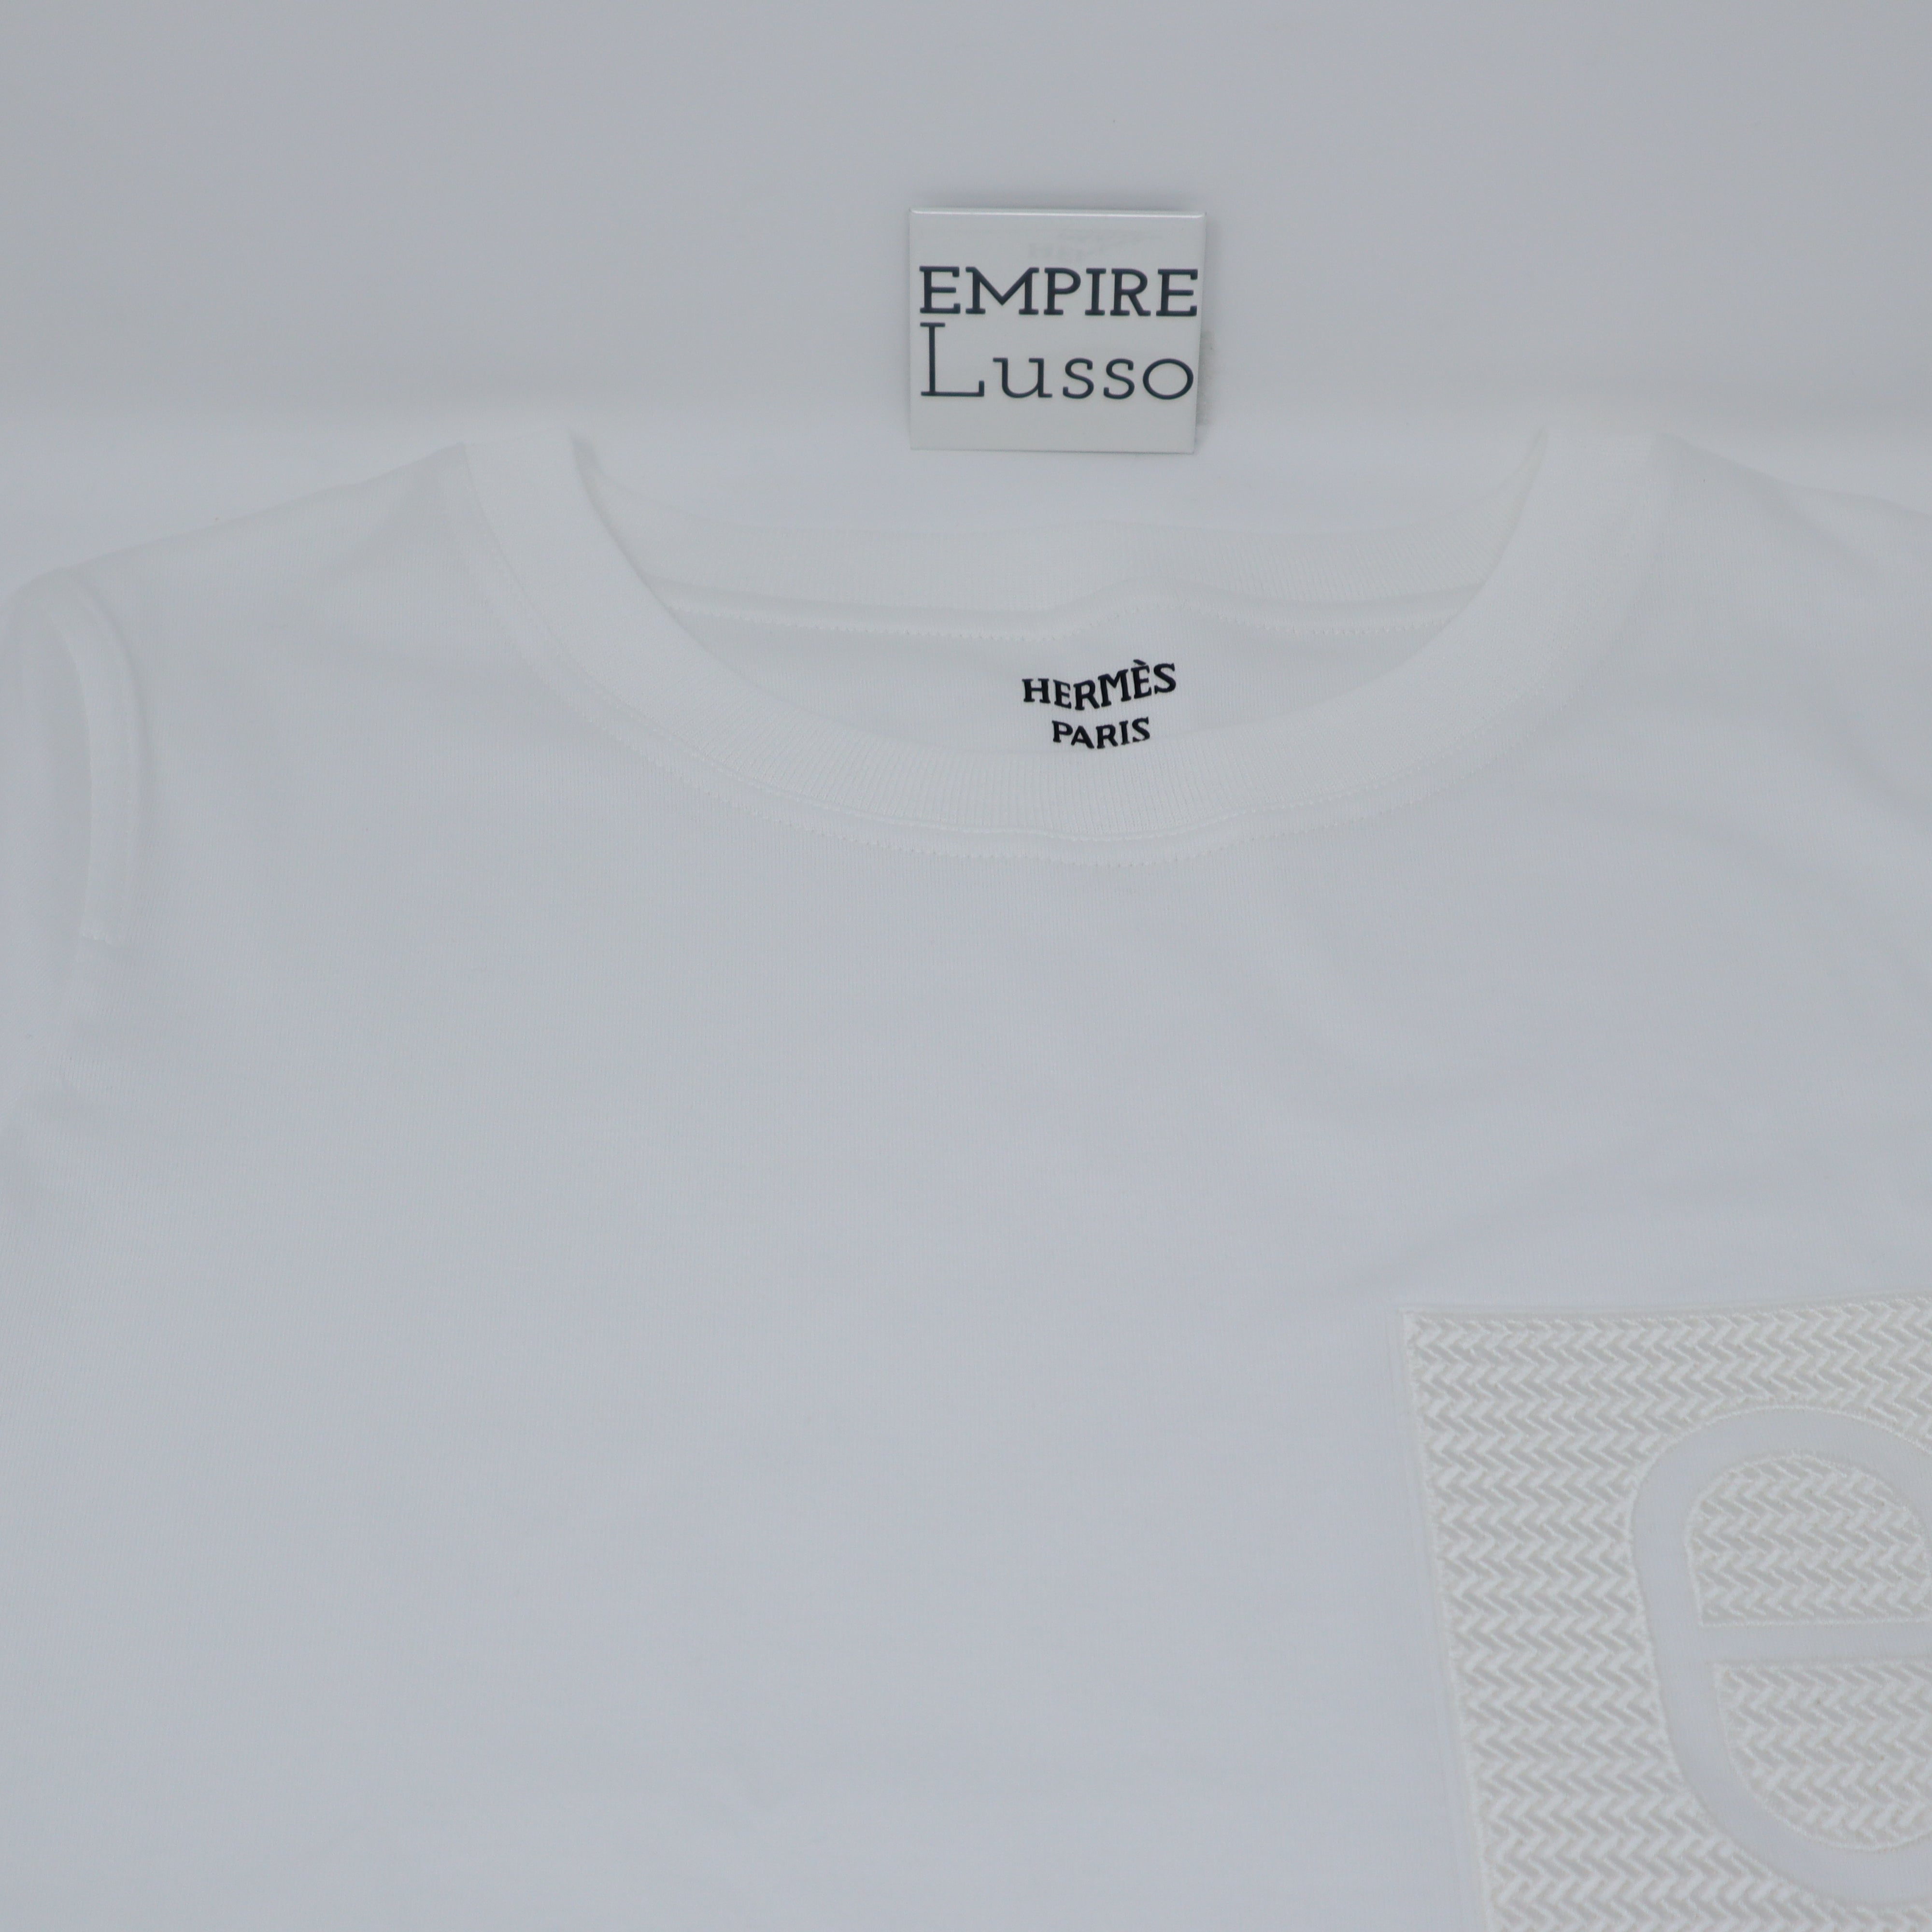 authentic Hermes SS2022 White T-shirt micro poche brodée - New with Tag,  Size 34